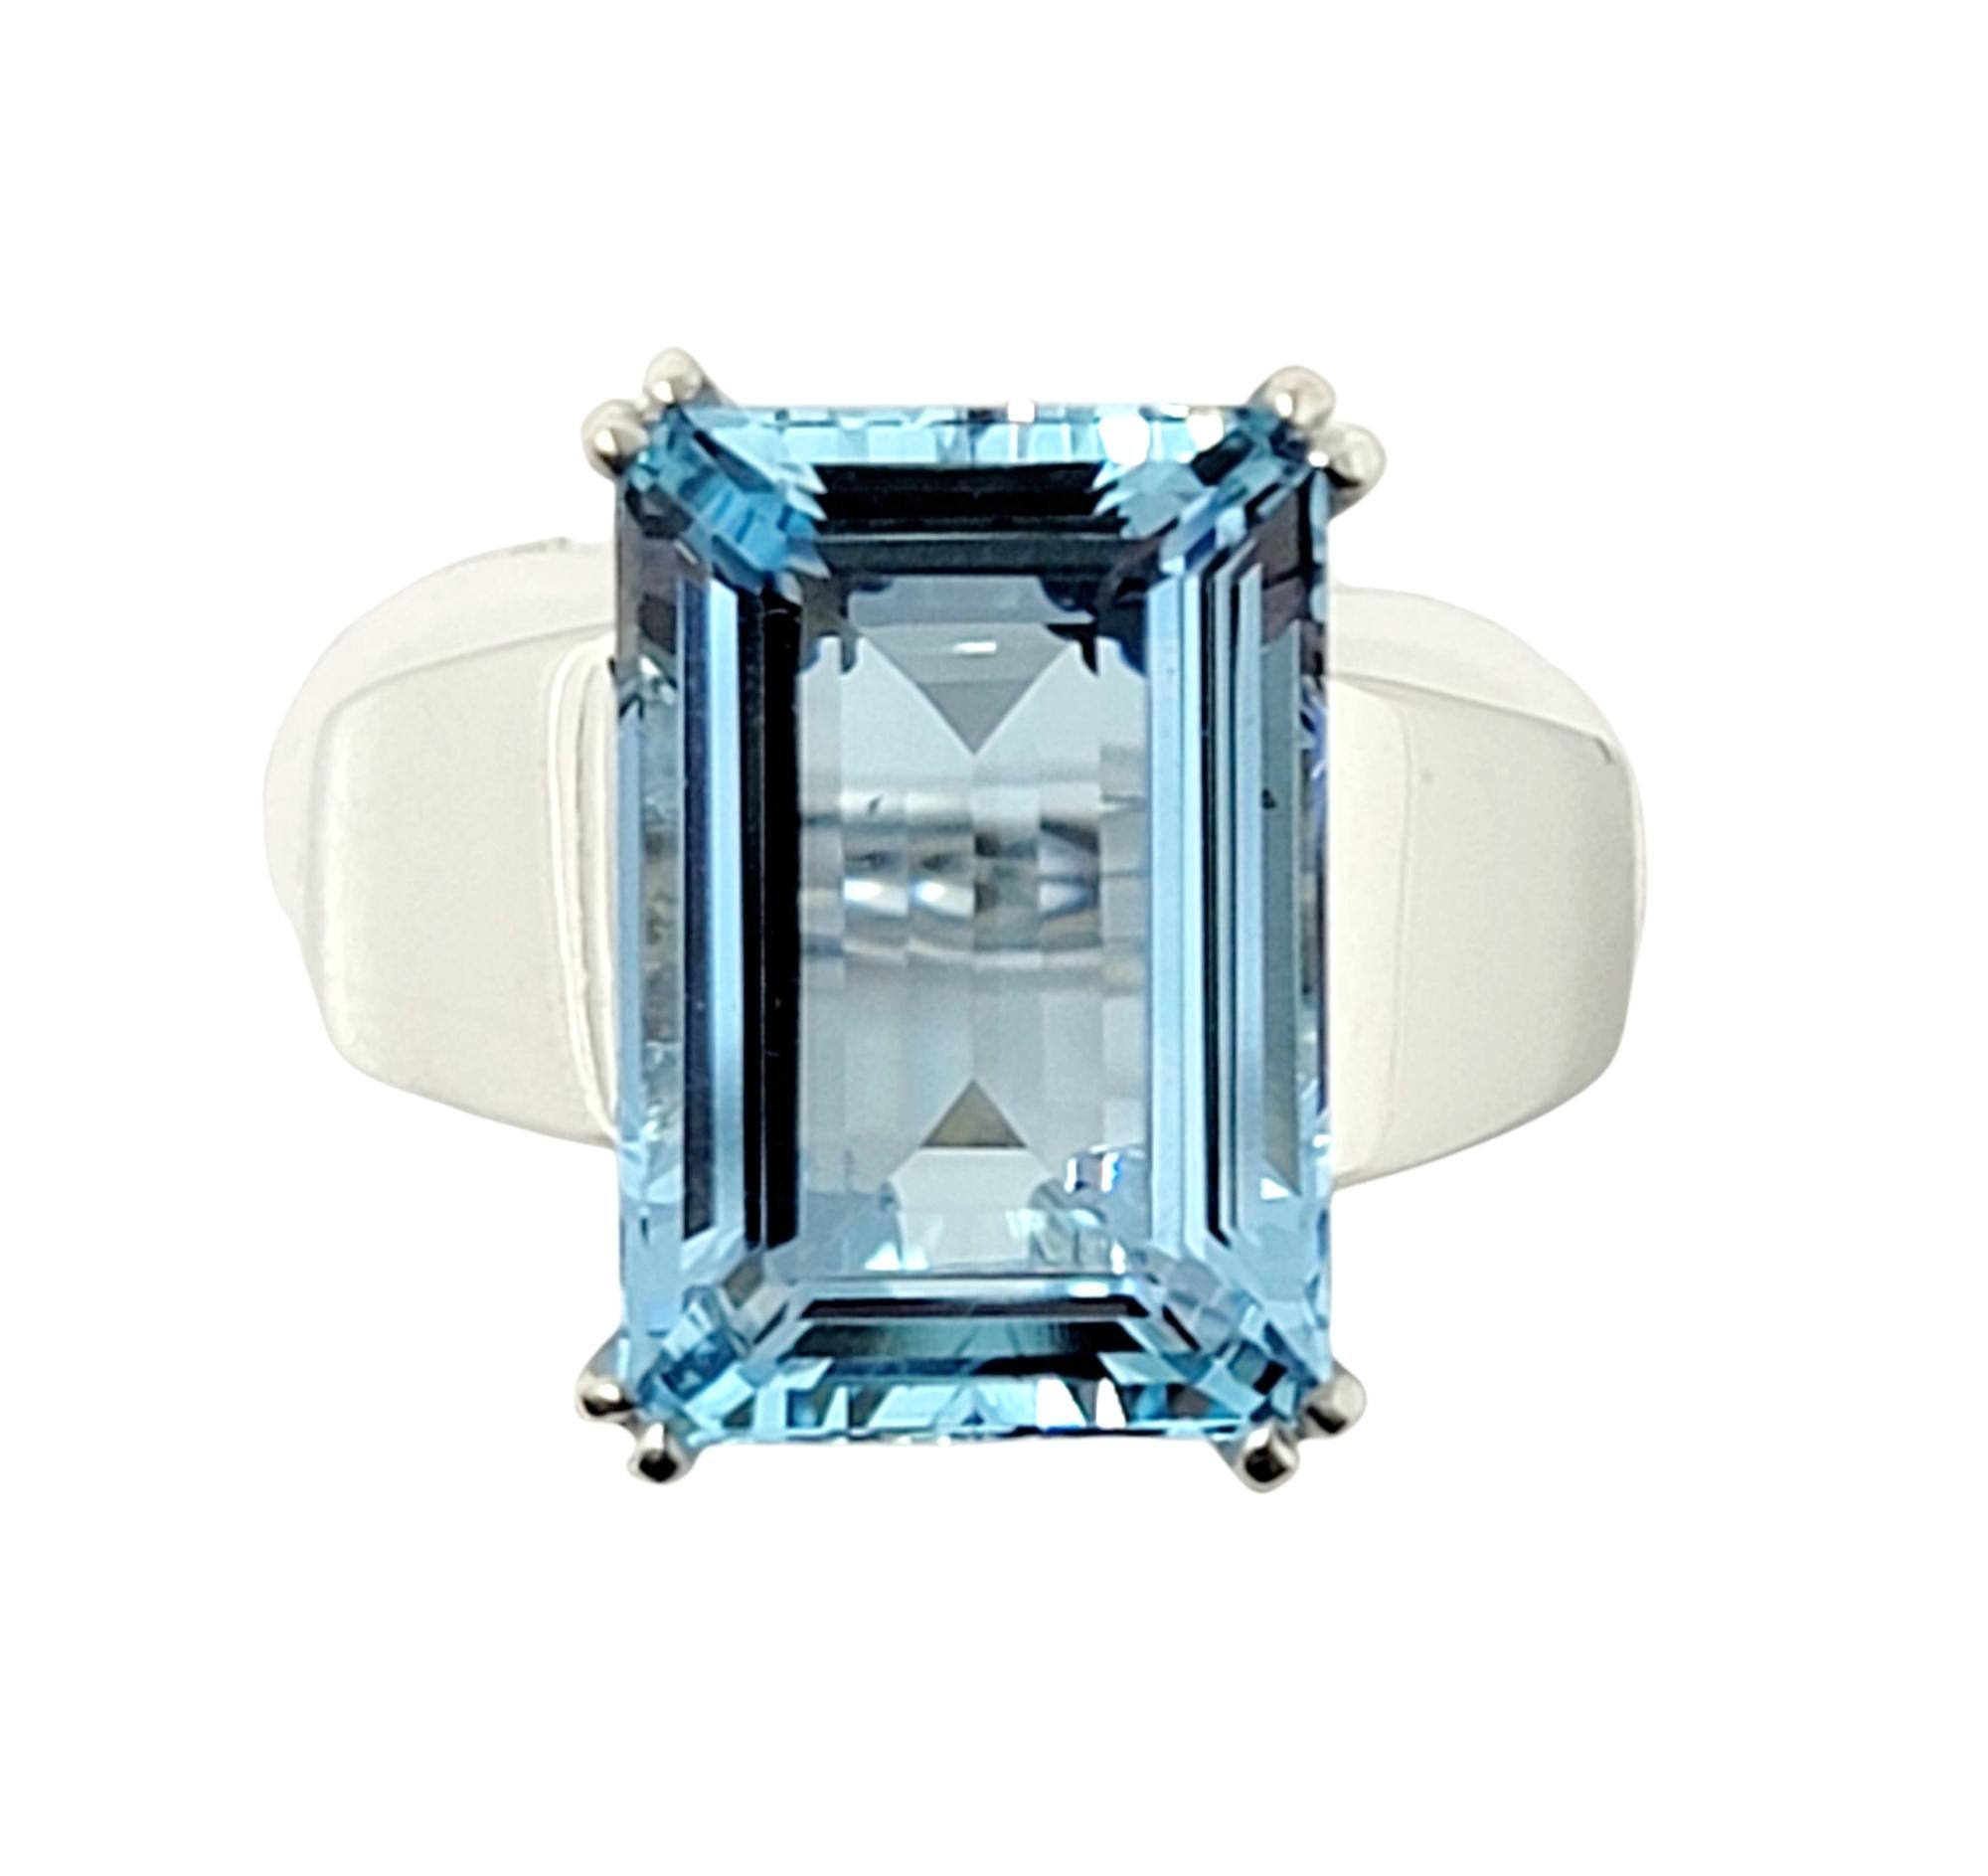 Ring size: 5.5

Breathtaking aquamarine cocktail ring. This eye-catching piece makes a bold statement with both its impressive size and exquisite color. The incredible 6.29 carat emerald cut aquamarine stone is prong set in 18 karat white gold and